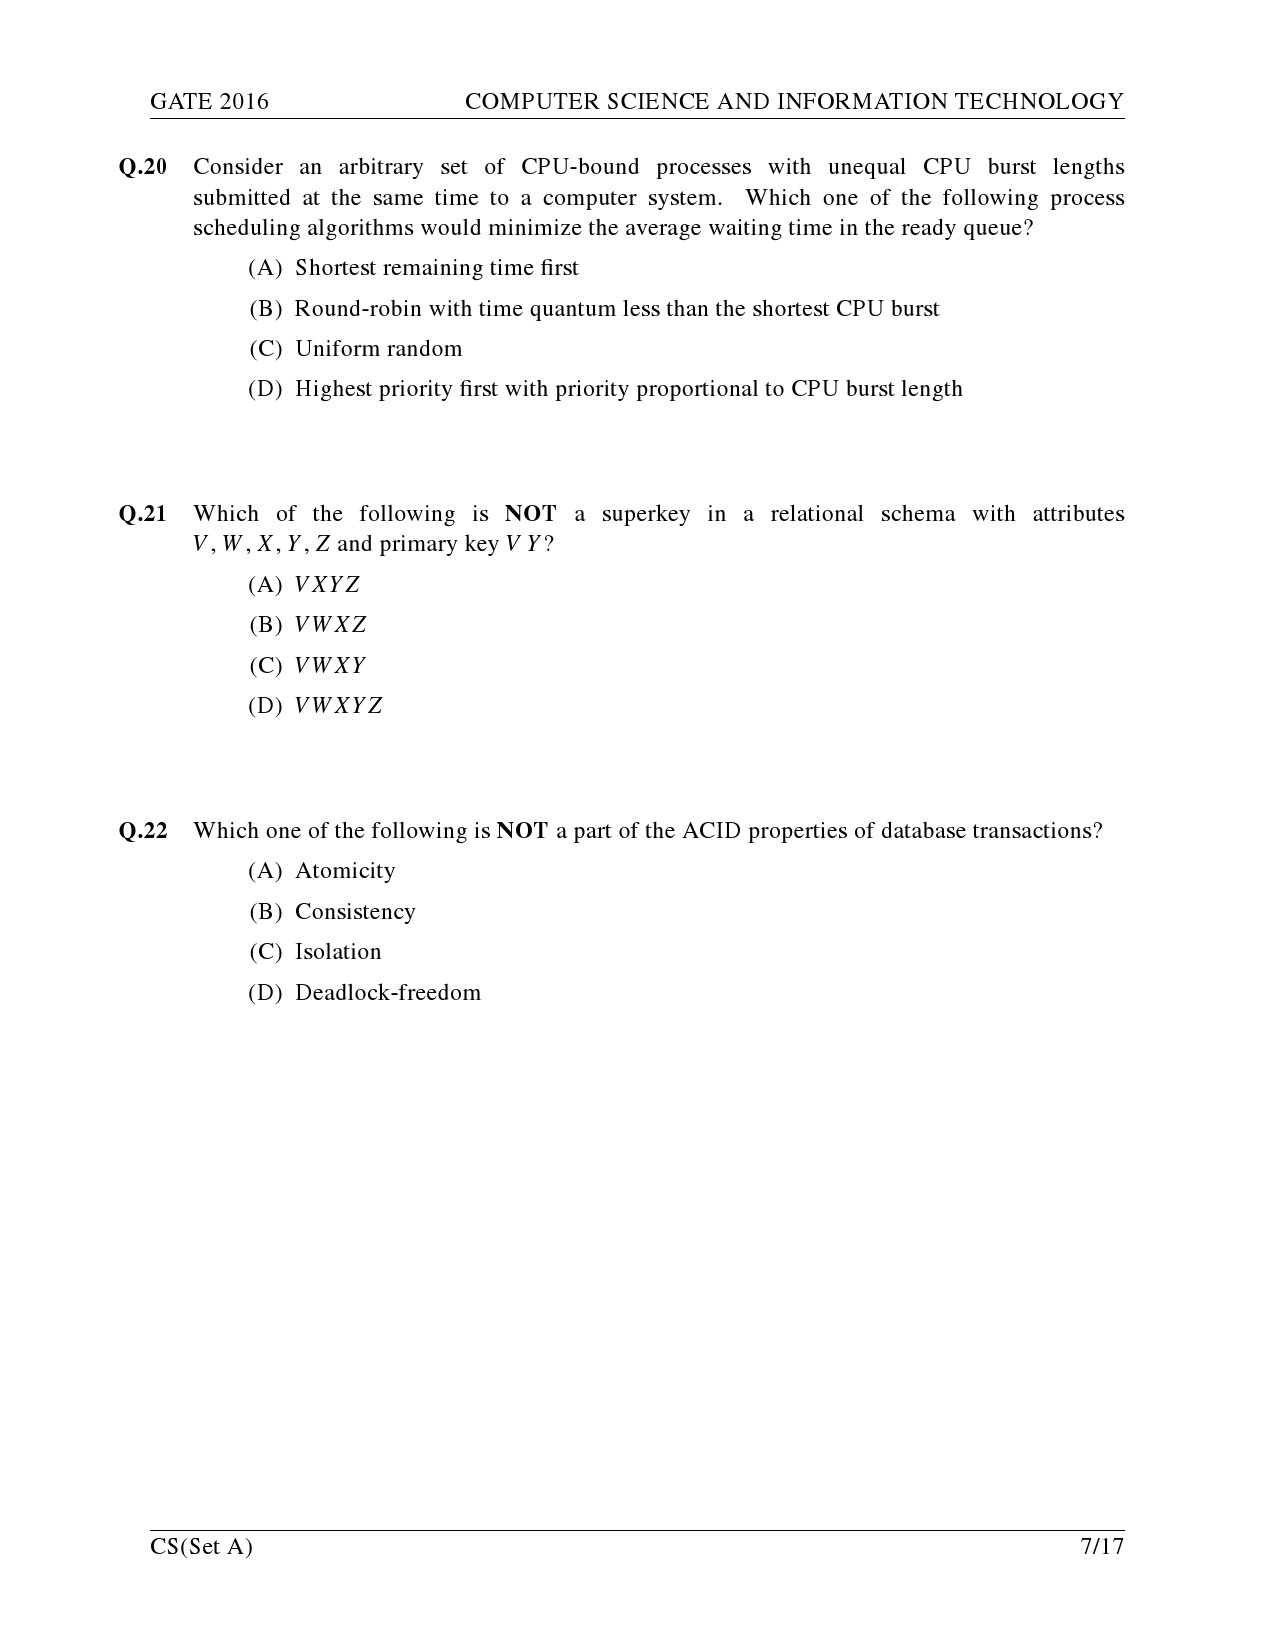 GATE Exam Question Paper 2016 Computer Science and Information Technology Set A 10